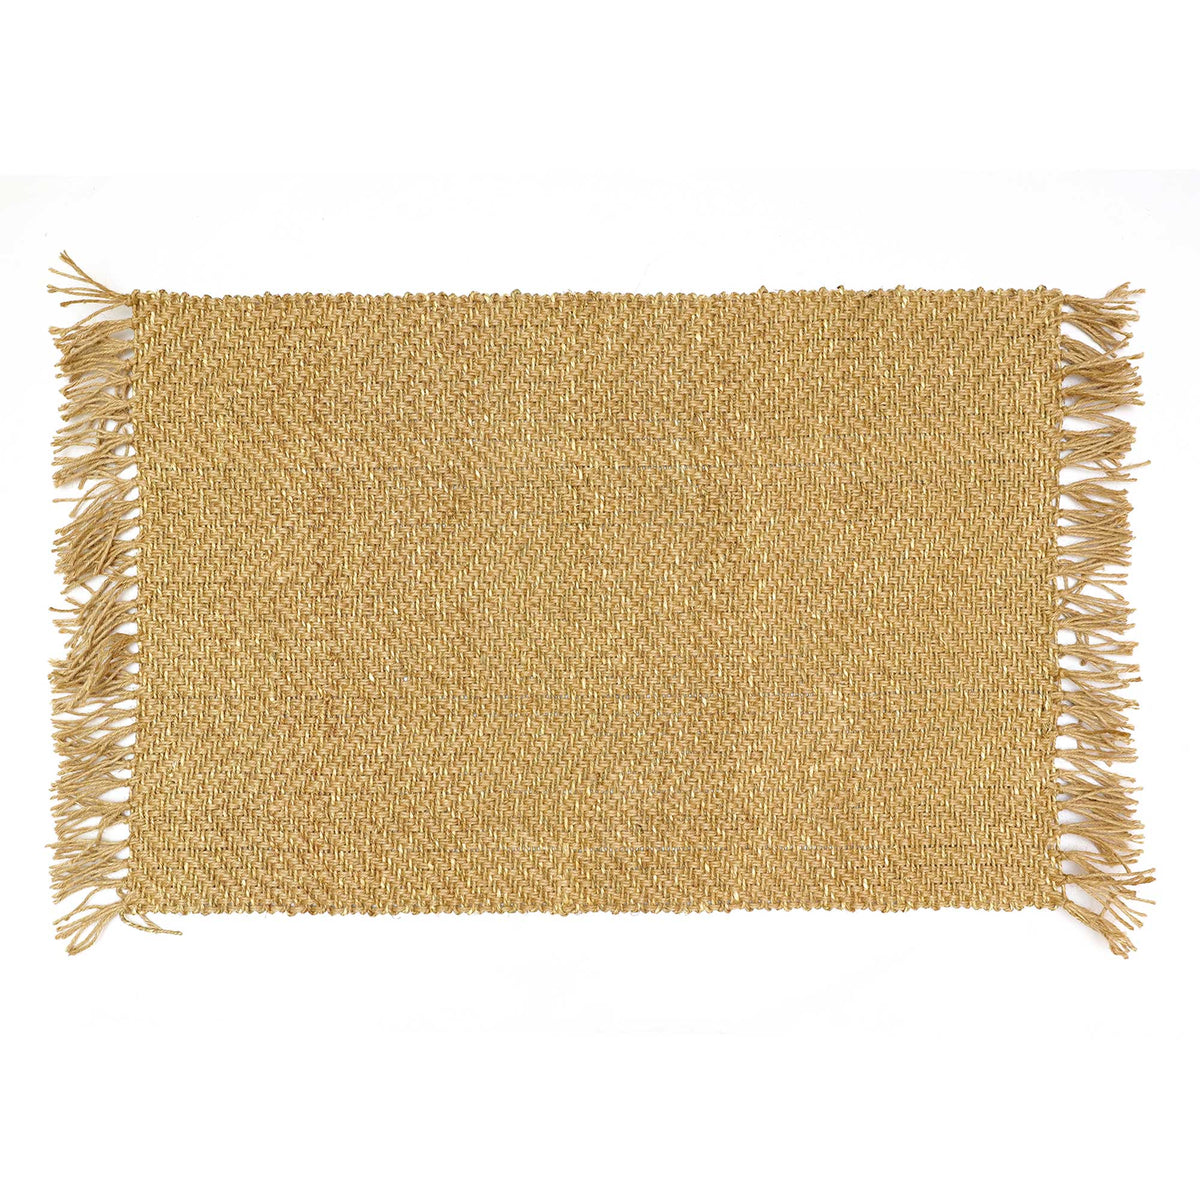 Frills and Fringes - Luxe Rug - Handmade Jute Carpet - Organic and Sustainable